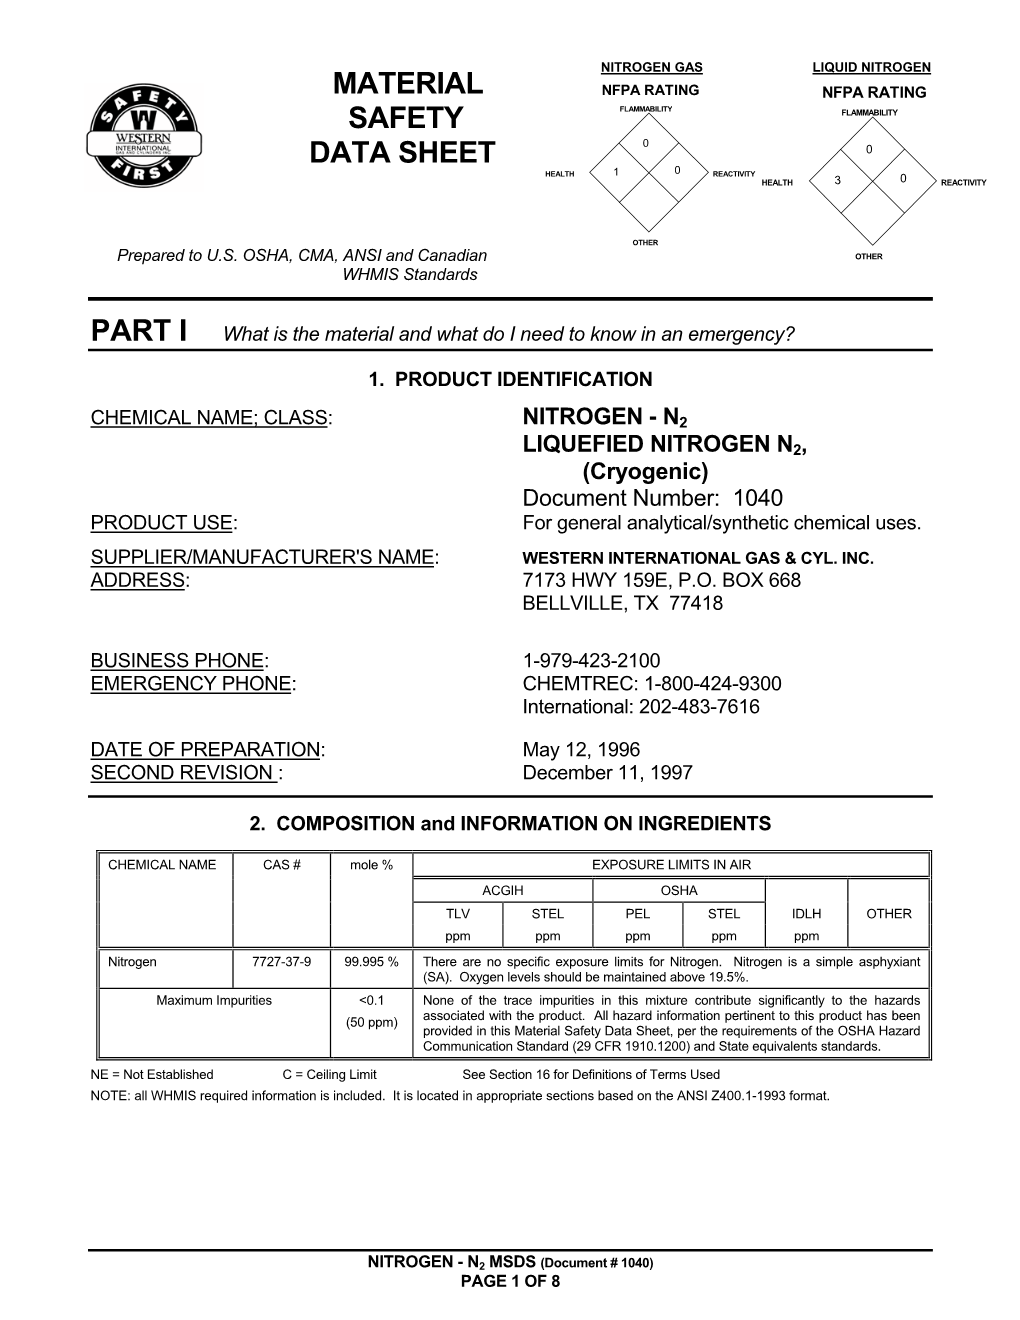 Material Safety Data Sheet, Per the Requirements of the OSHA Hazard Communication Standard (29 CFR 1910.1200) and State Equivalents Standards